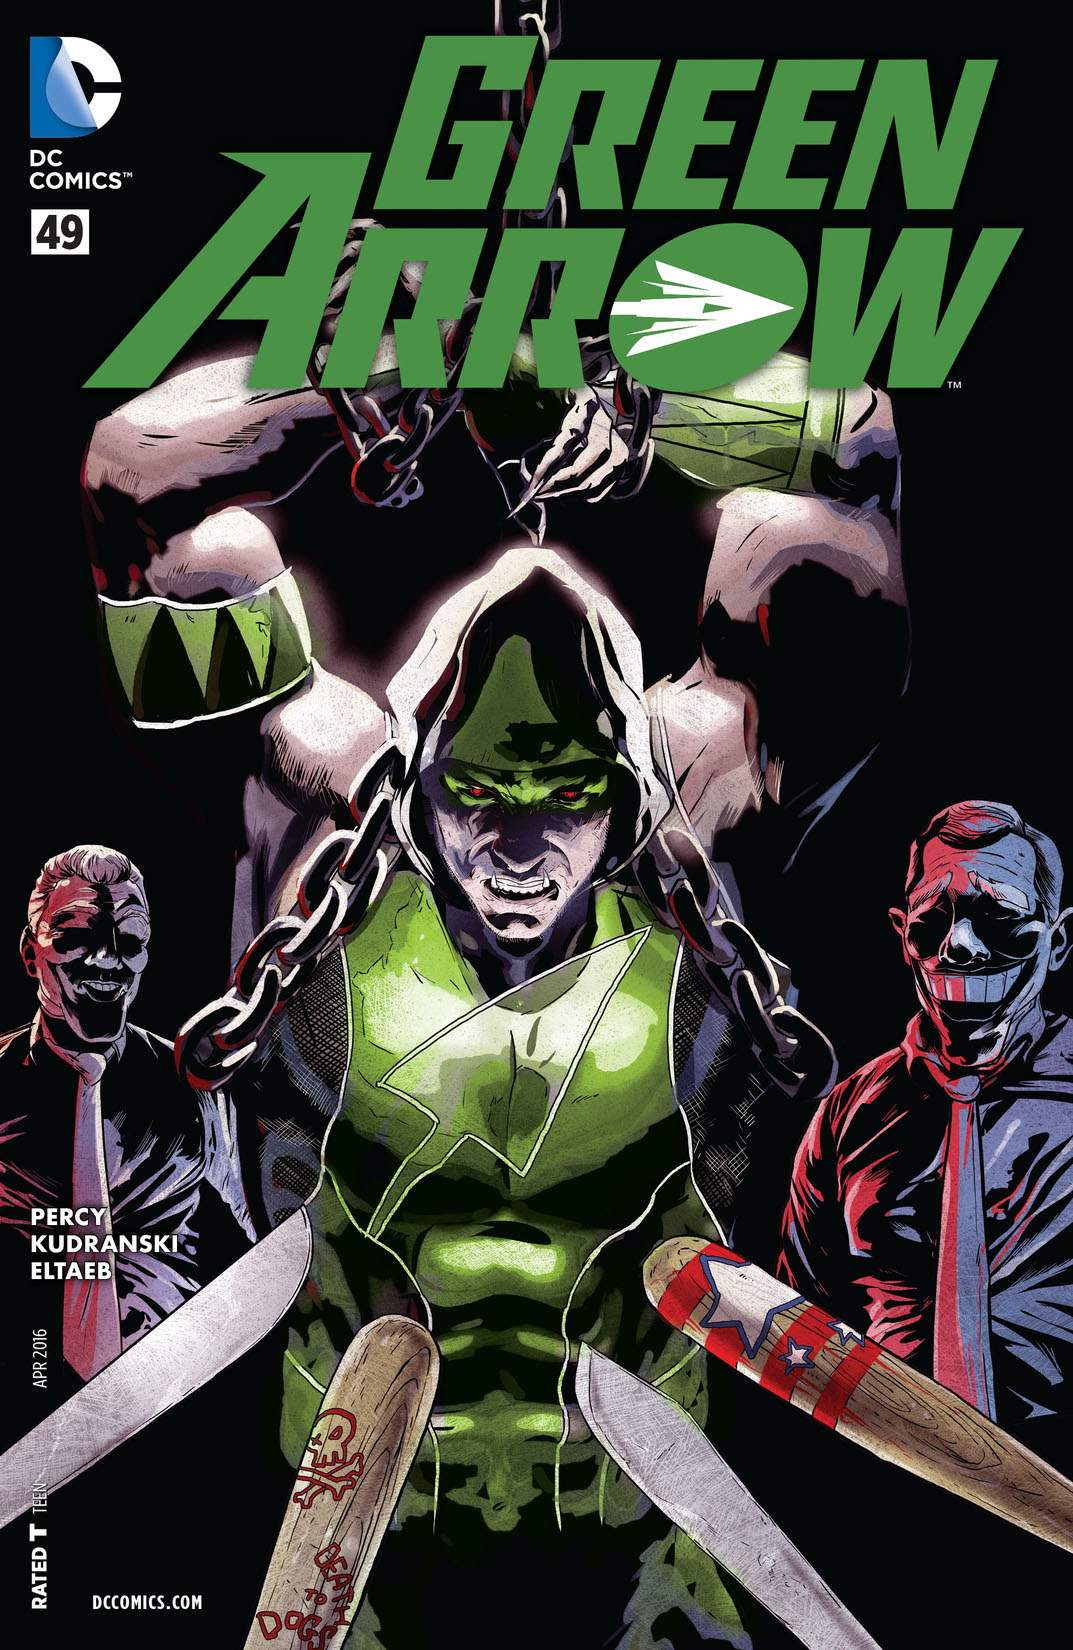 Green Arrow (2011-) #49 preview images